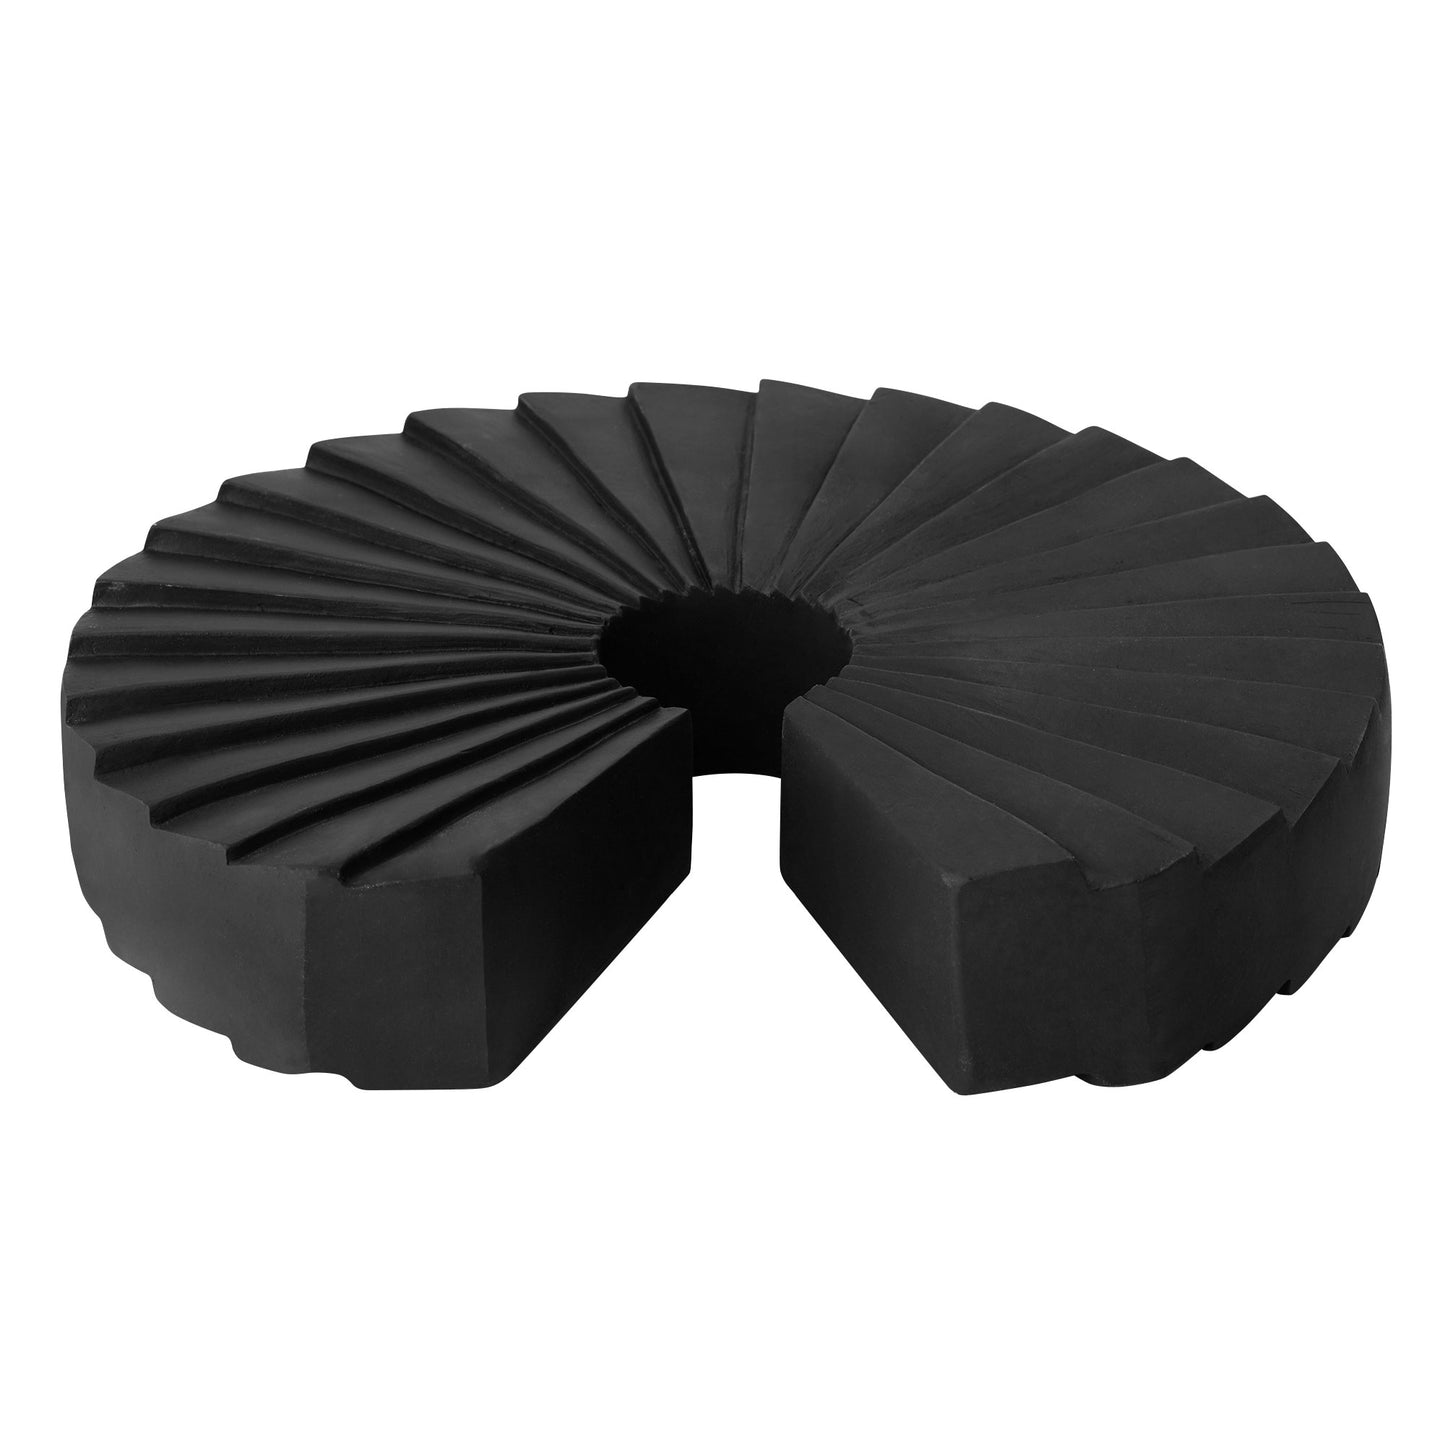 Cascading Curls 2-Piece Resin Table Top Set in Black